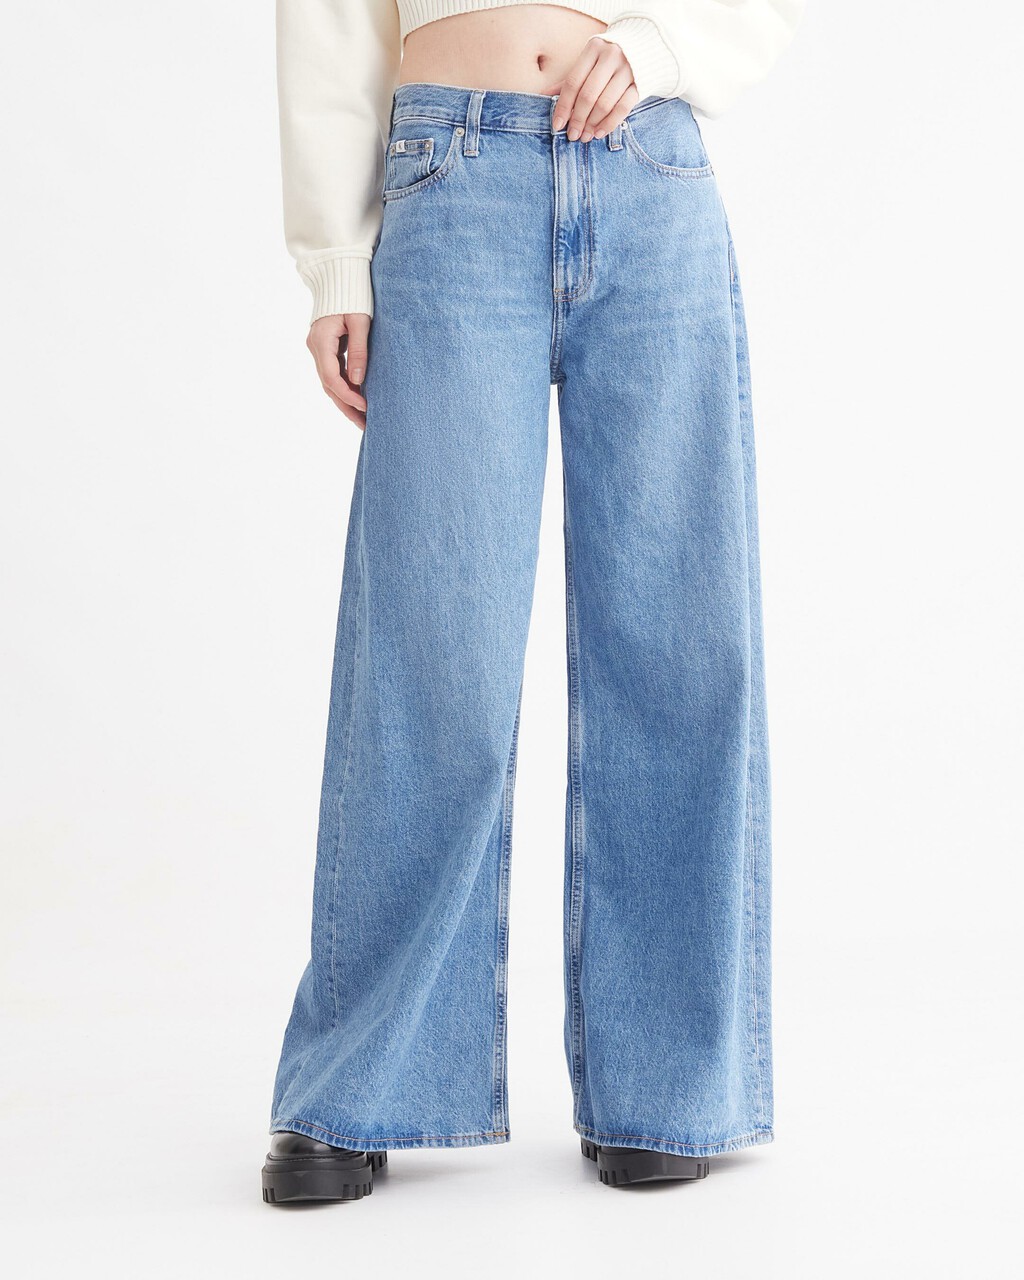 RECONSIDERED LOW RISE LOOSE JEANS, Light Blue, hi-res